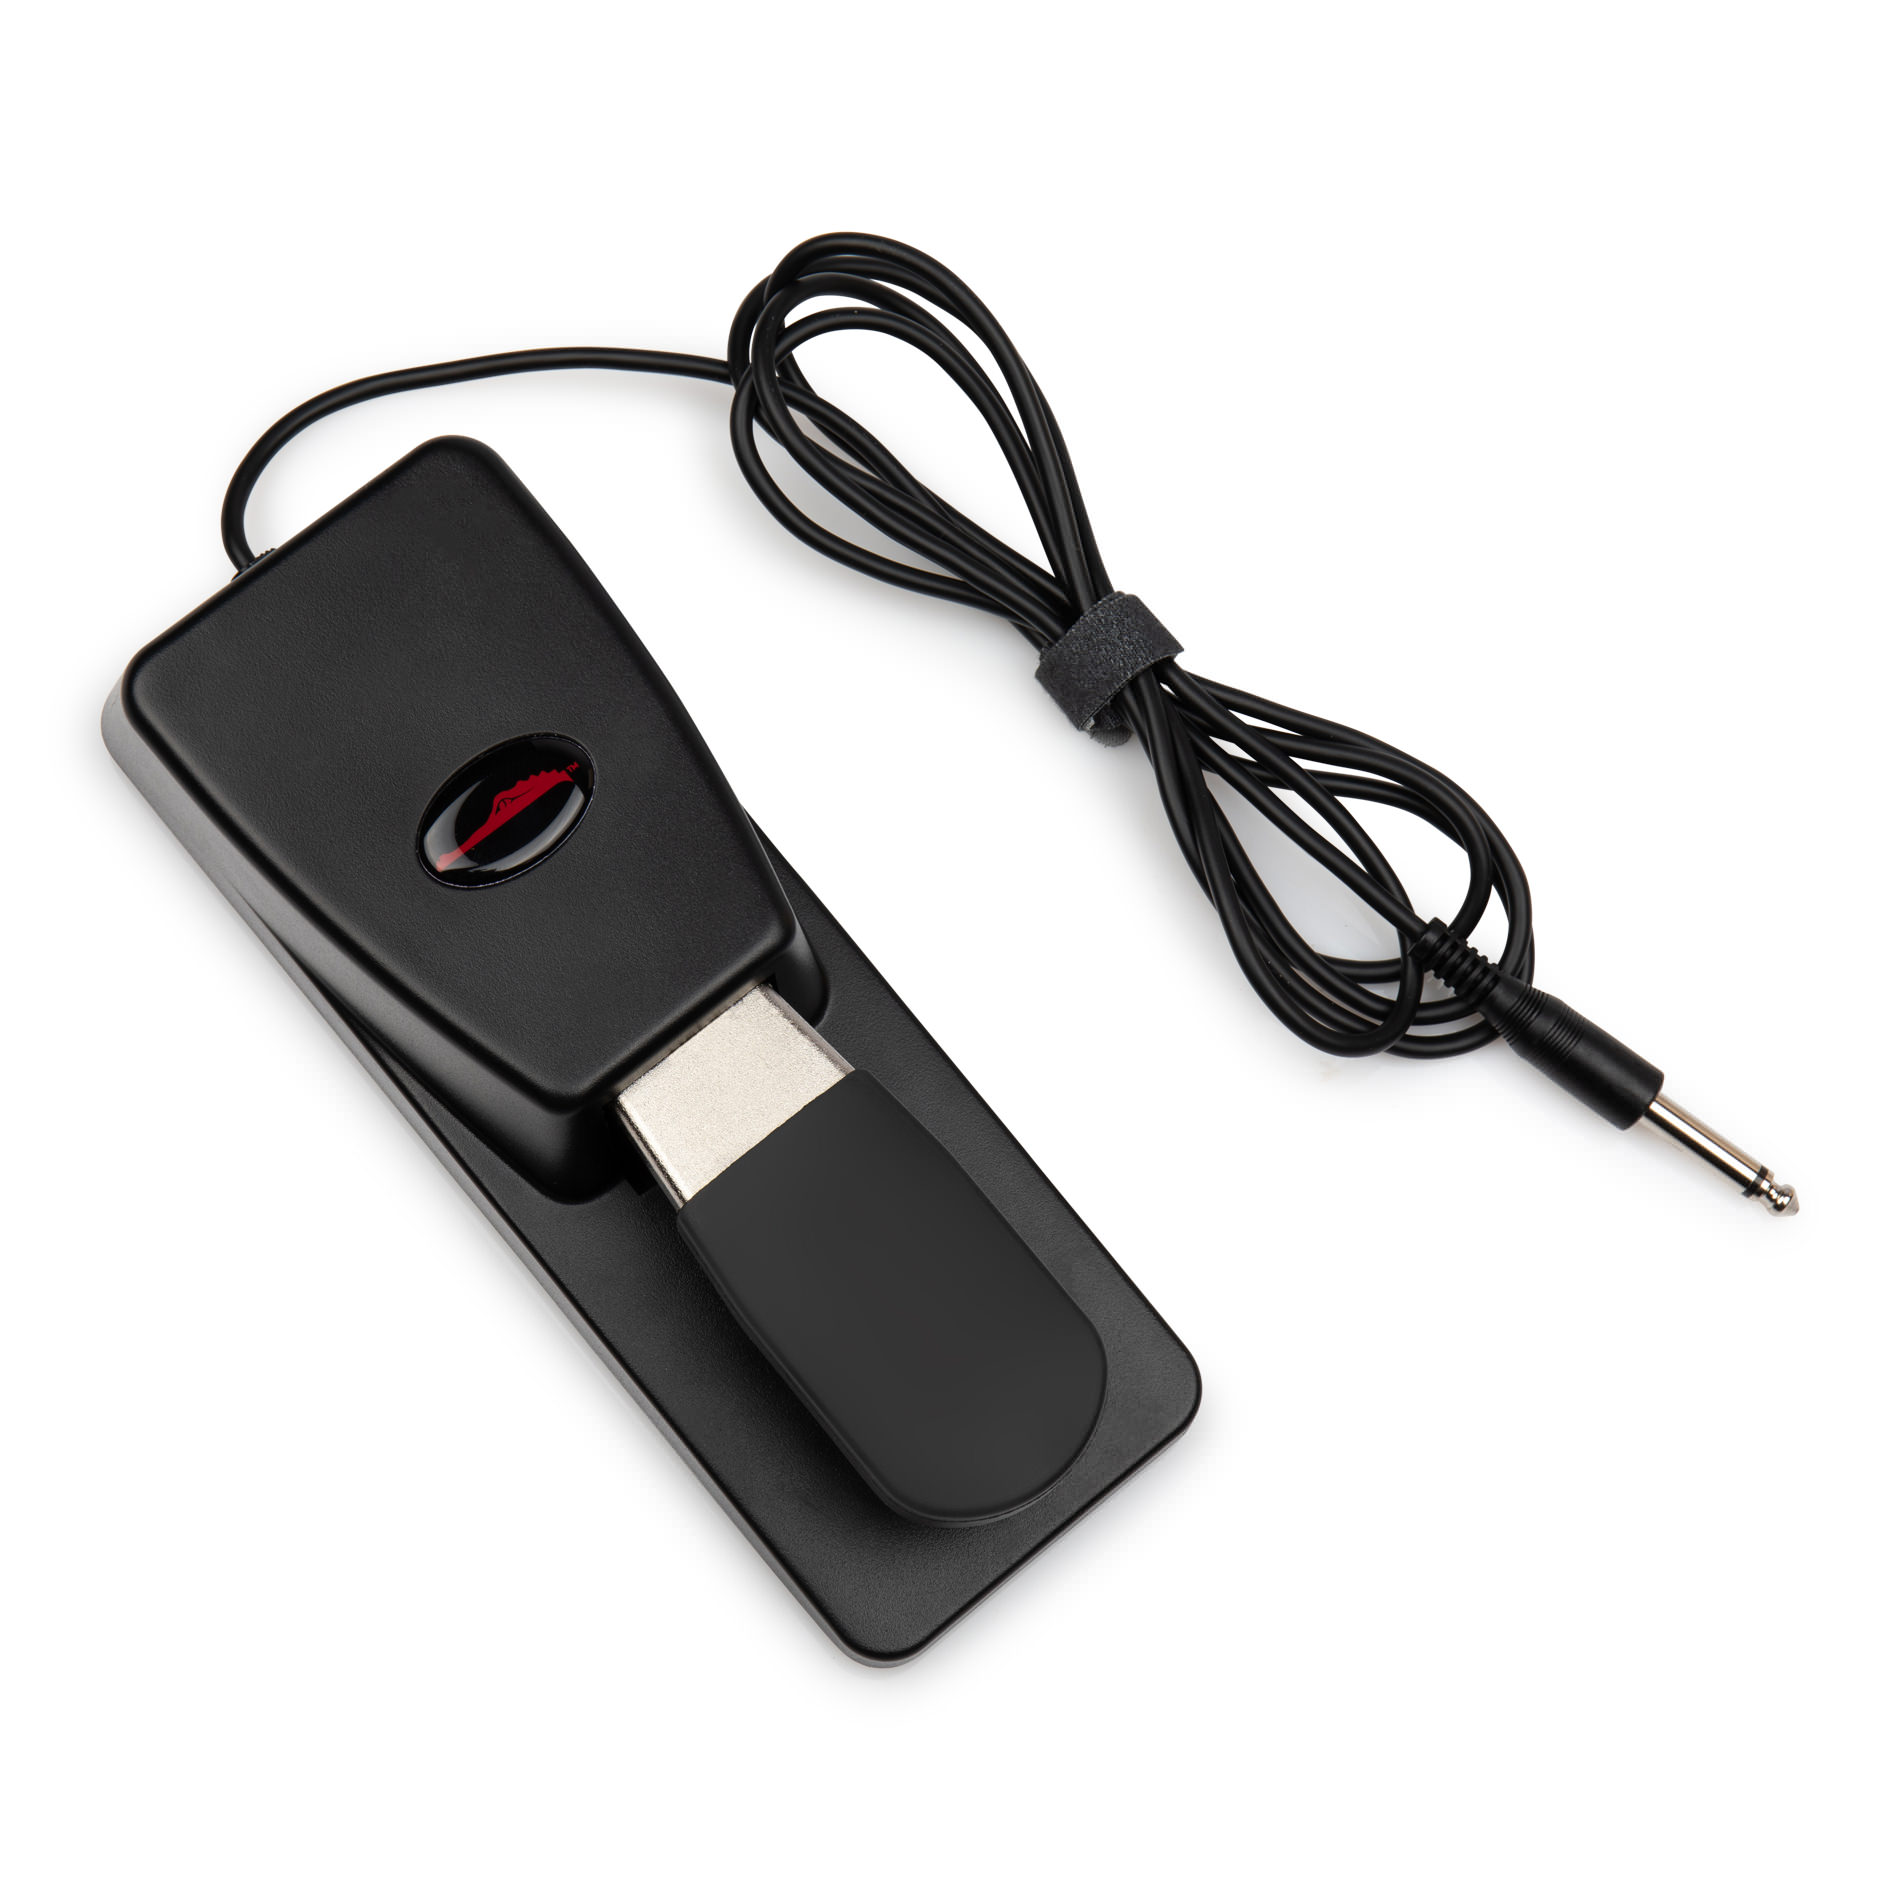 Frameworks Traditional Piano Sustain Pedal for Electronic Keyboards